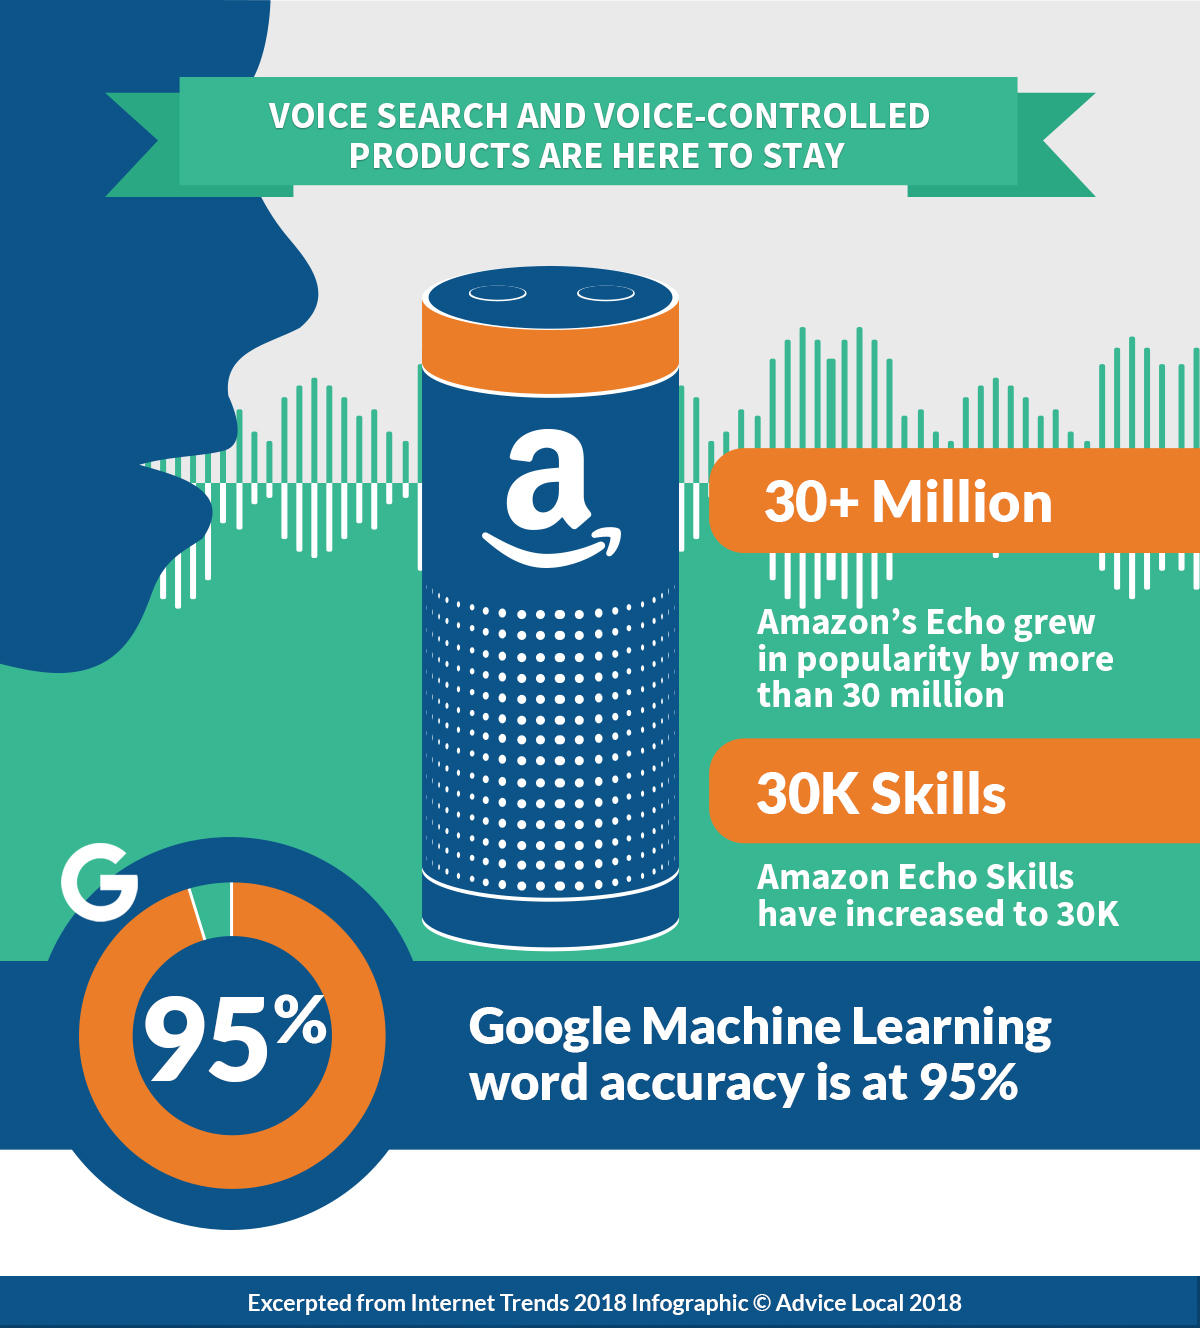 Internet Trends 2018 - Voice Search